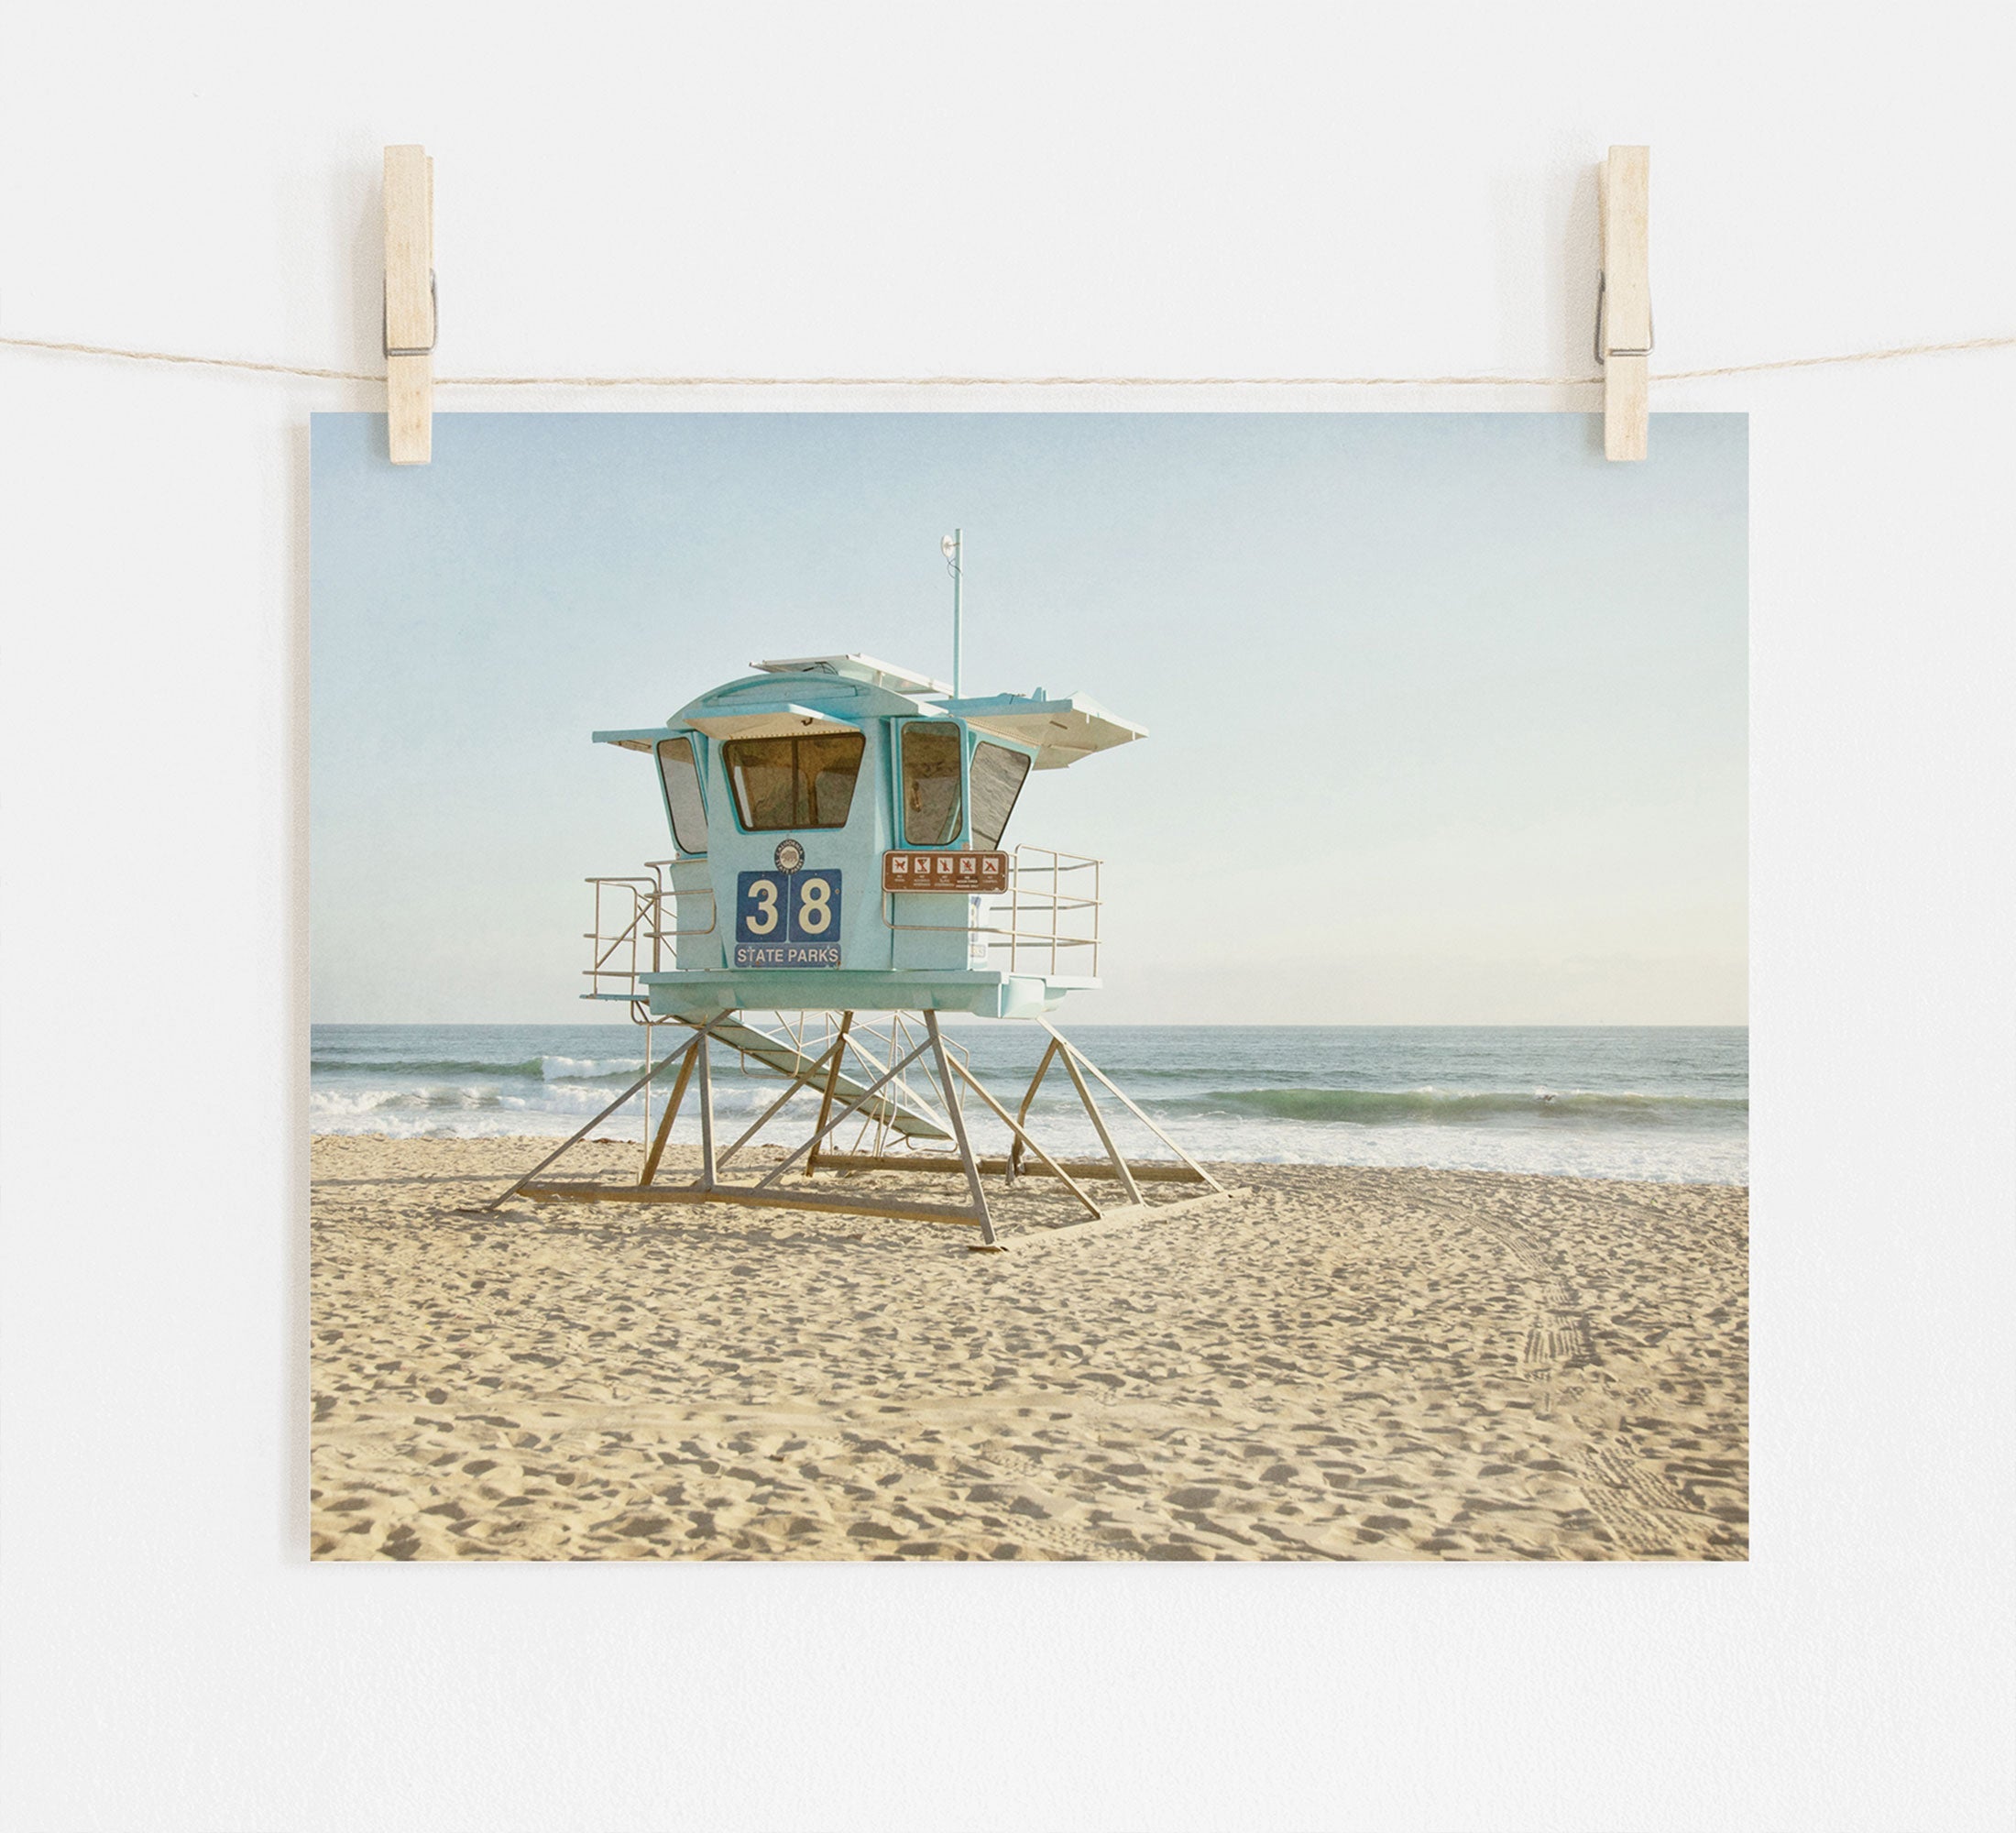 A photograph of a light blue lifeguard tower numbered 38 on a sandy beach, printed on archival photographic paper, displayed on a beige wall, held by two wooden pegs. Waves gently lap the Offley Green California Coastal Print, &#39;Carlsbad Lifeguard Tower&#39;.